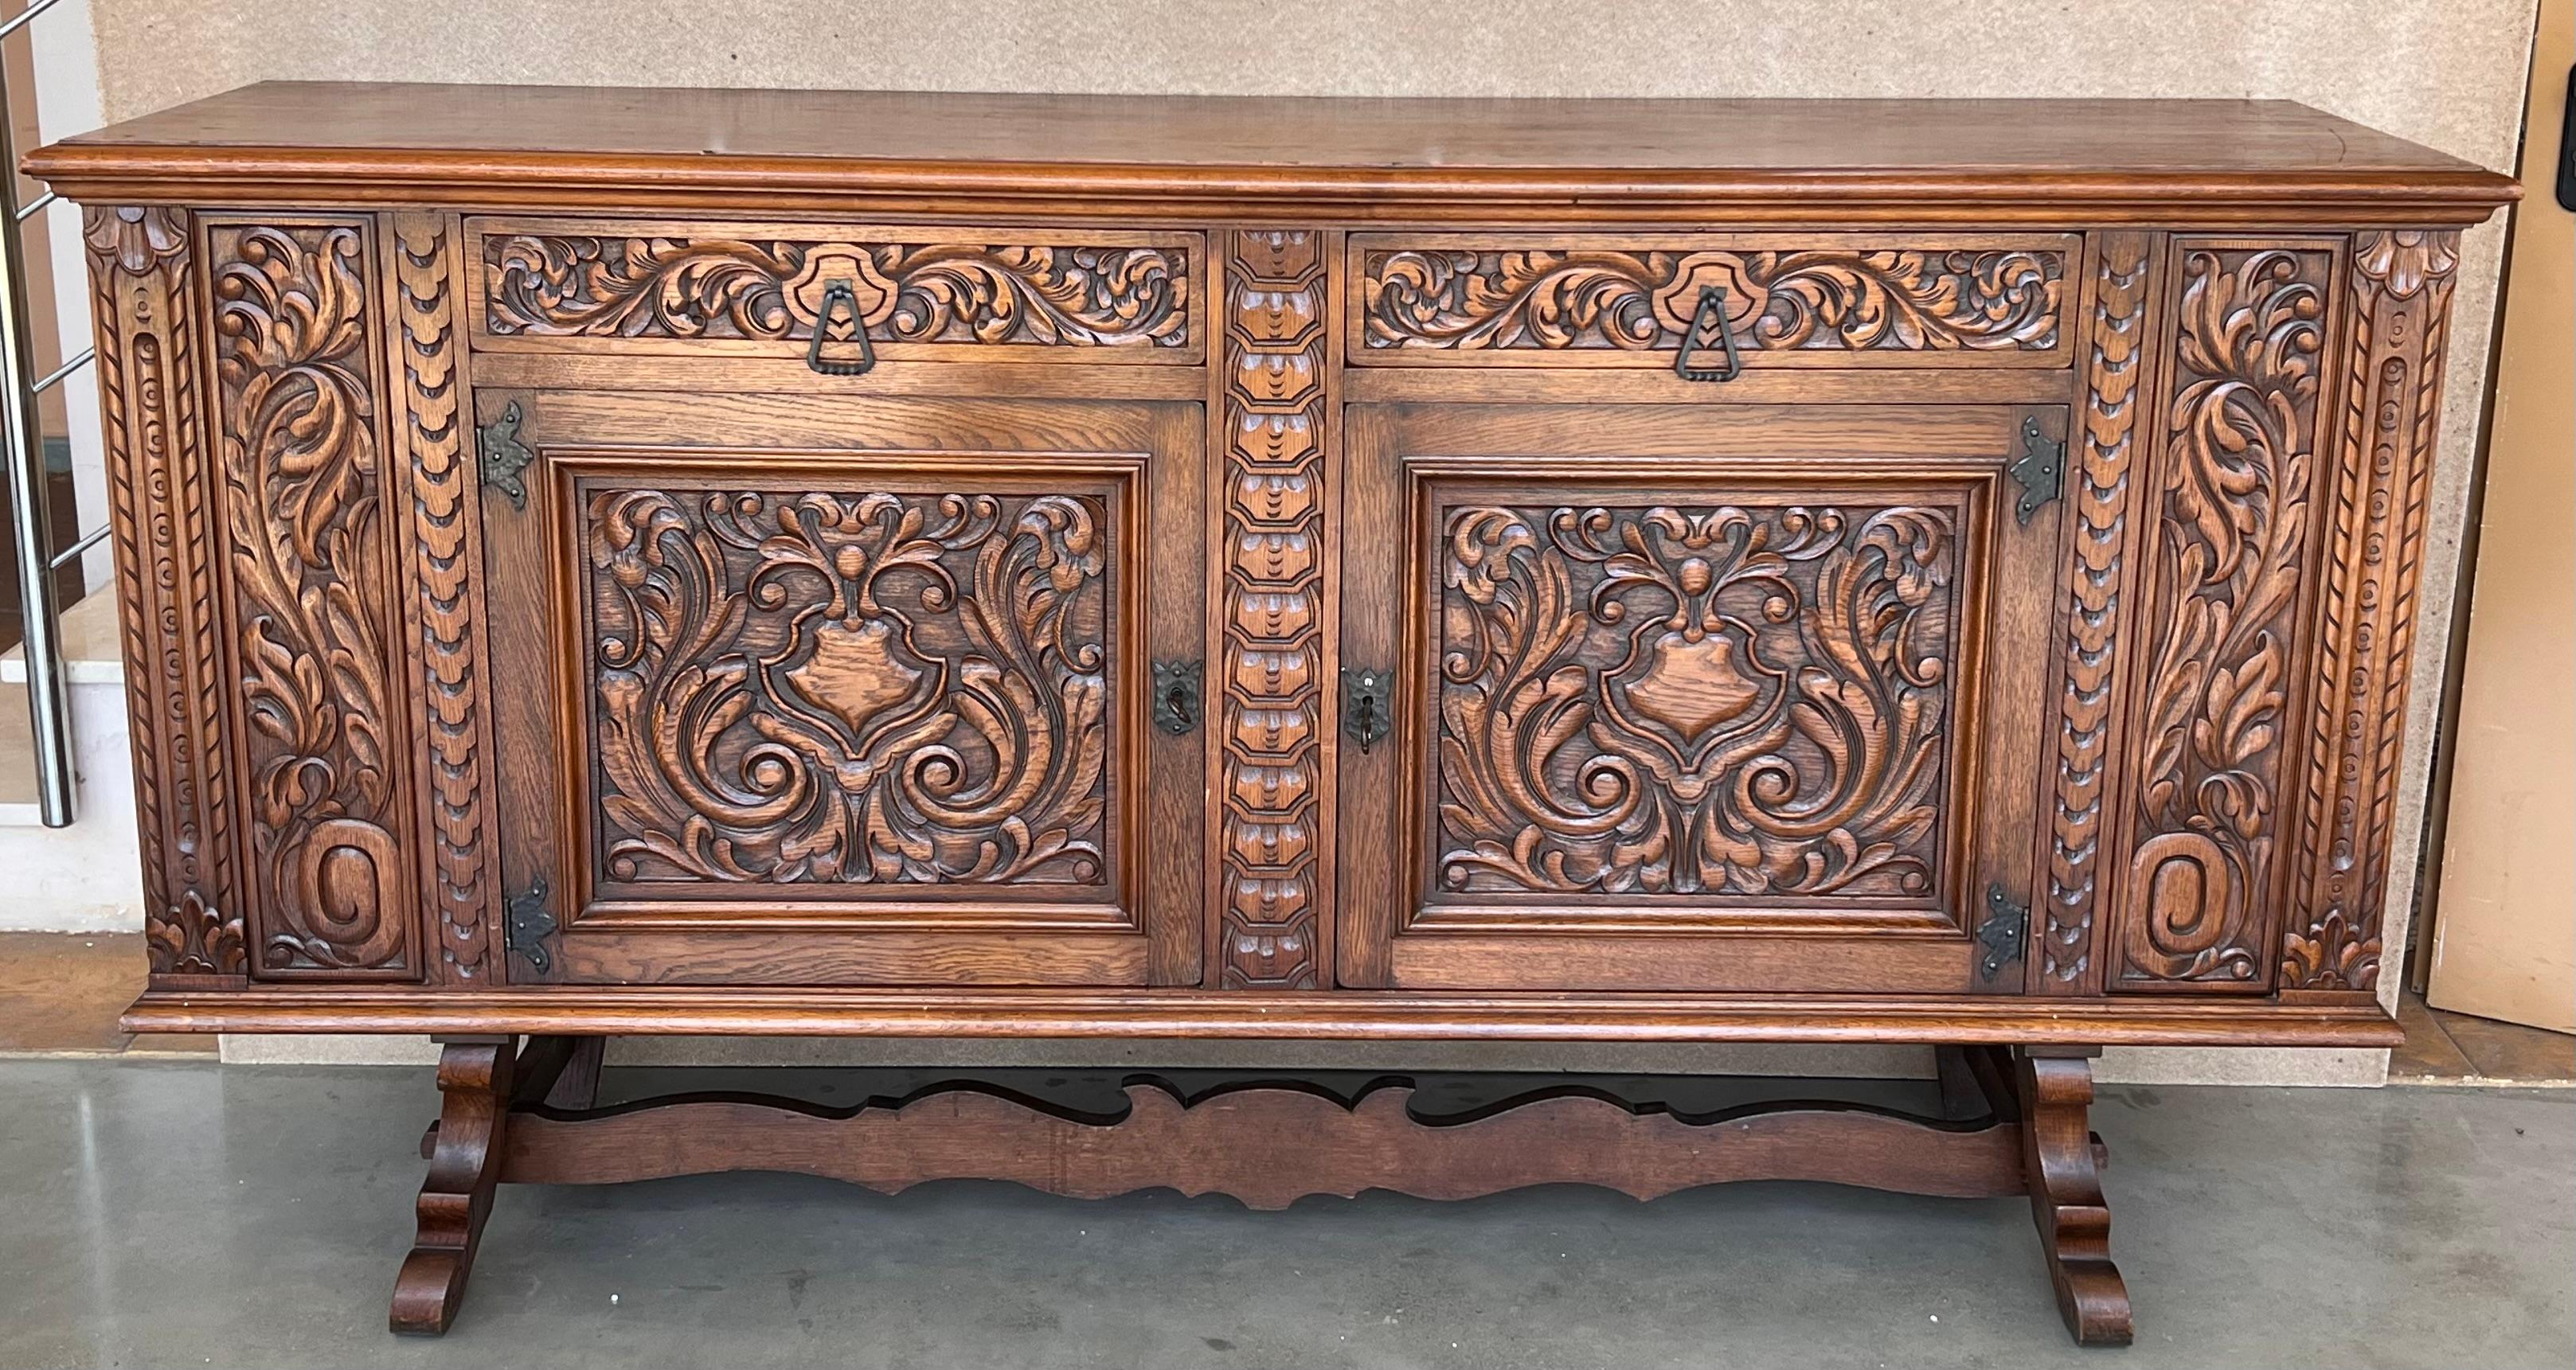 19th century Catalan Spanish buffet with two carved drawers and two doors.